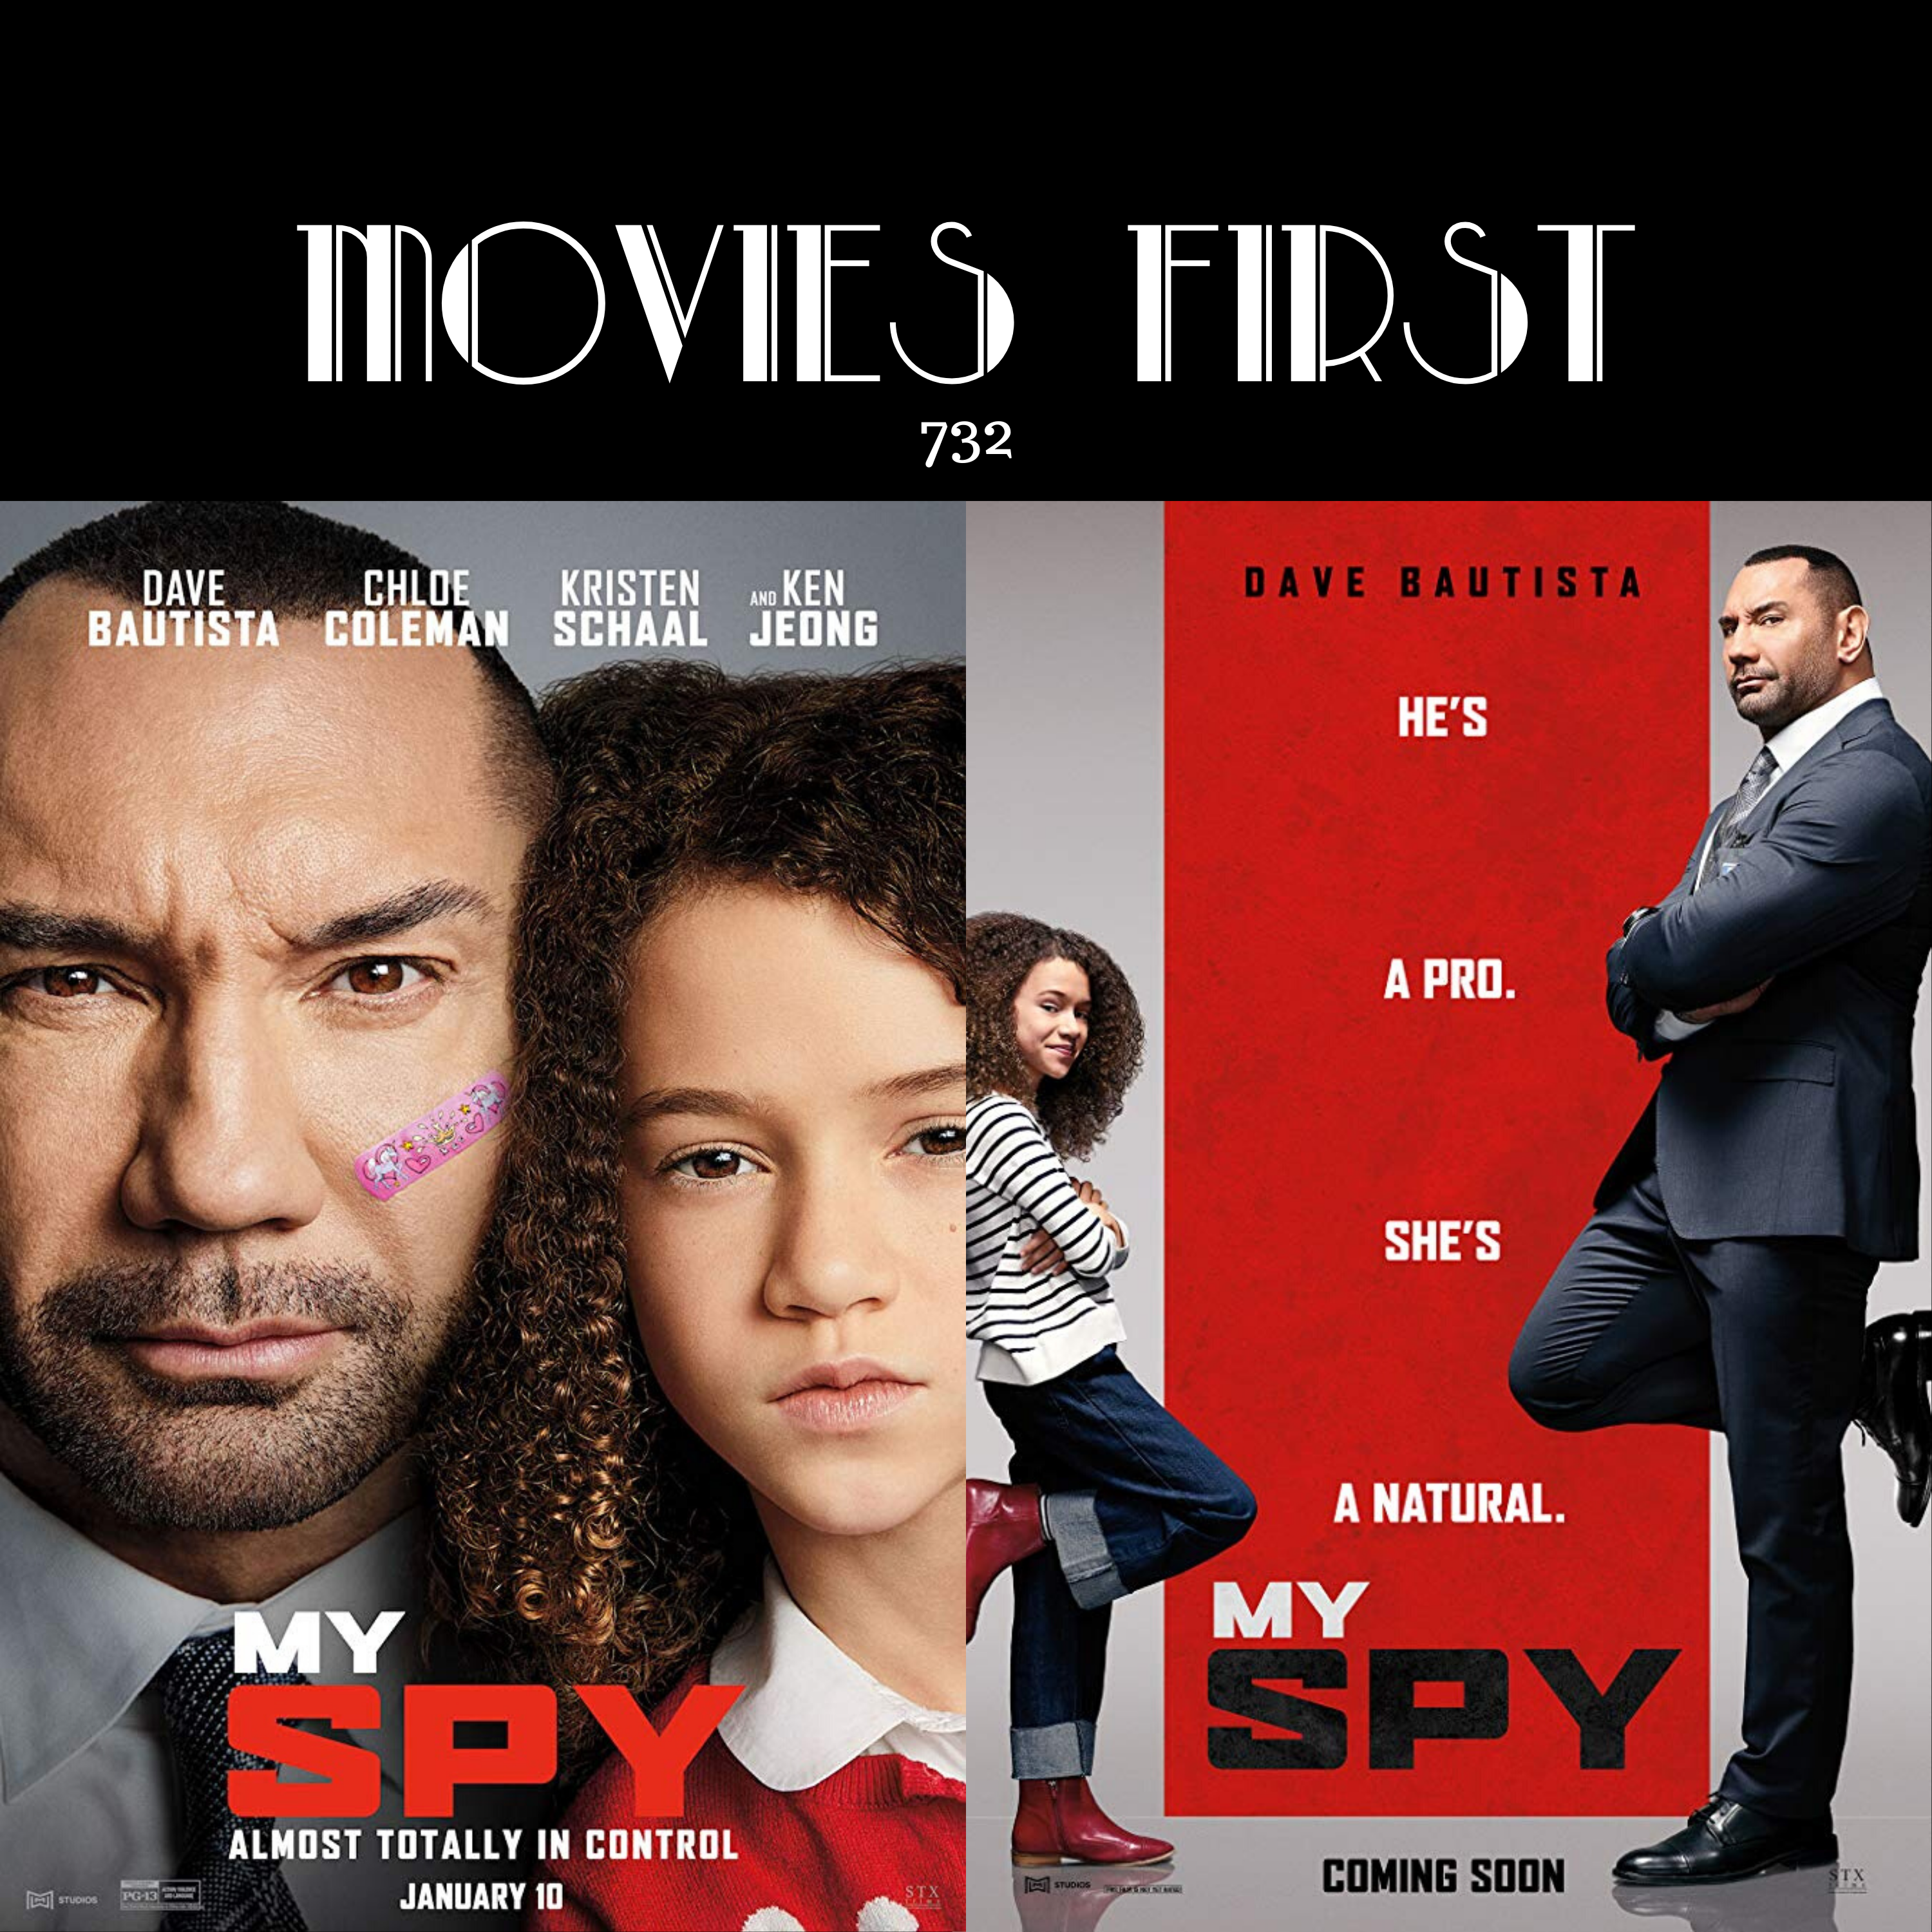 372: My Spy (Action, Comedy, Family) (the @MoviesFirst review)